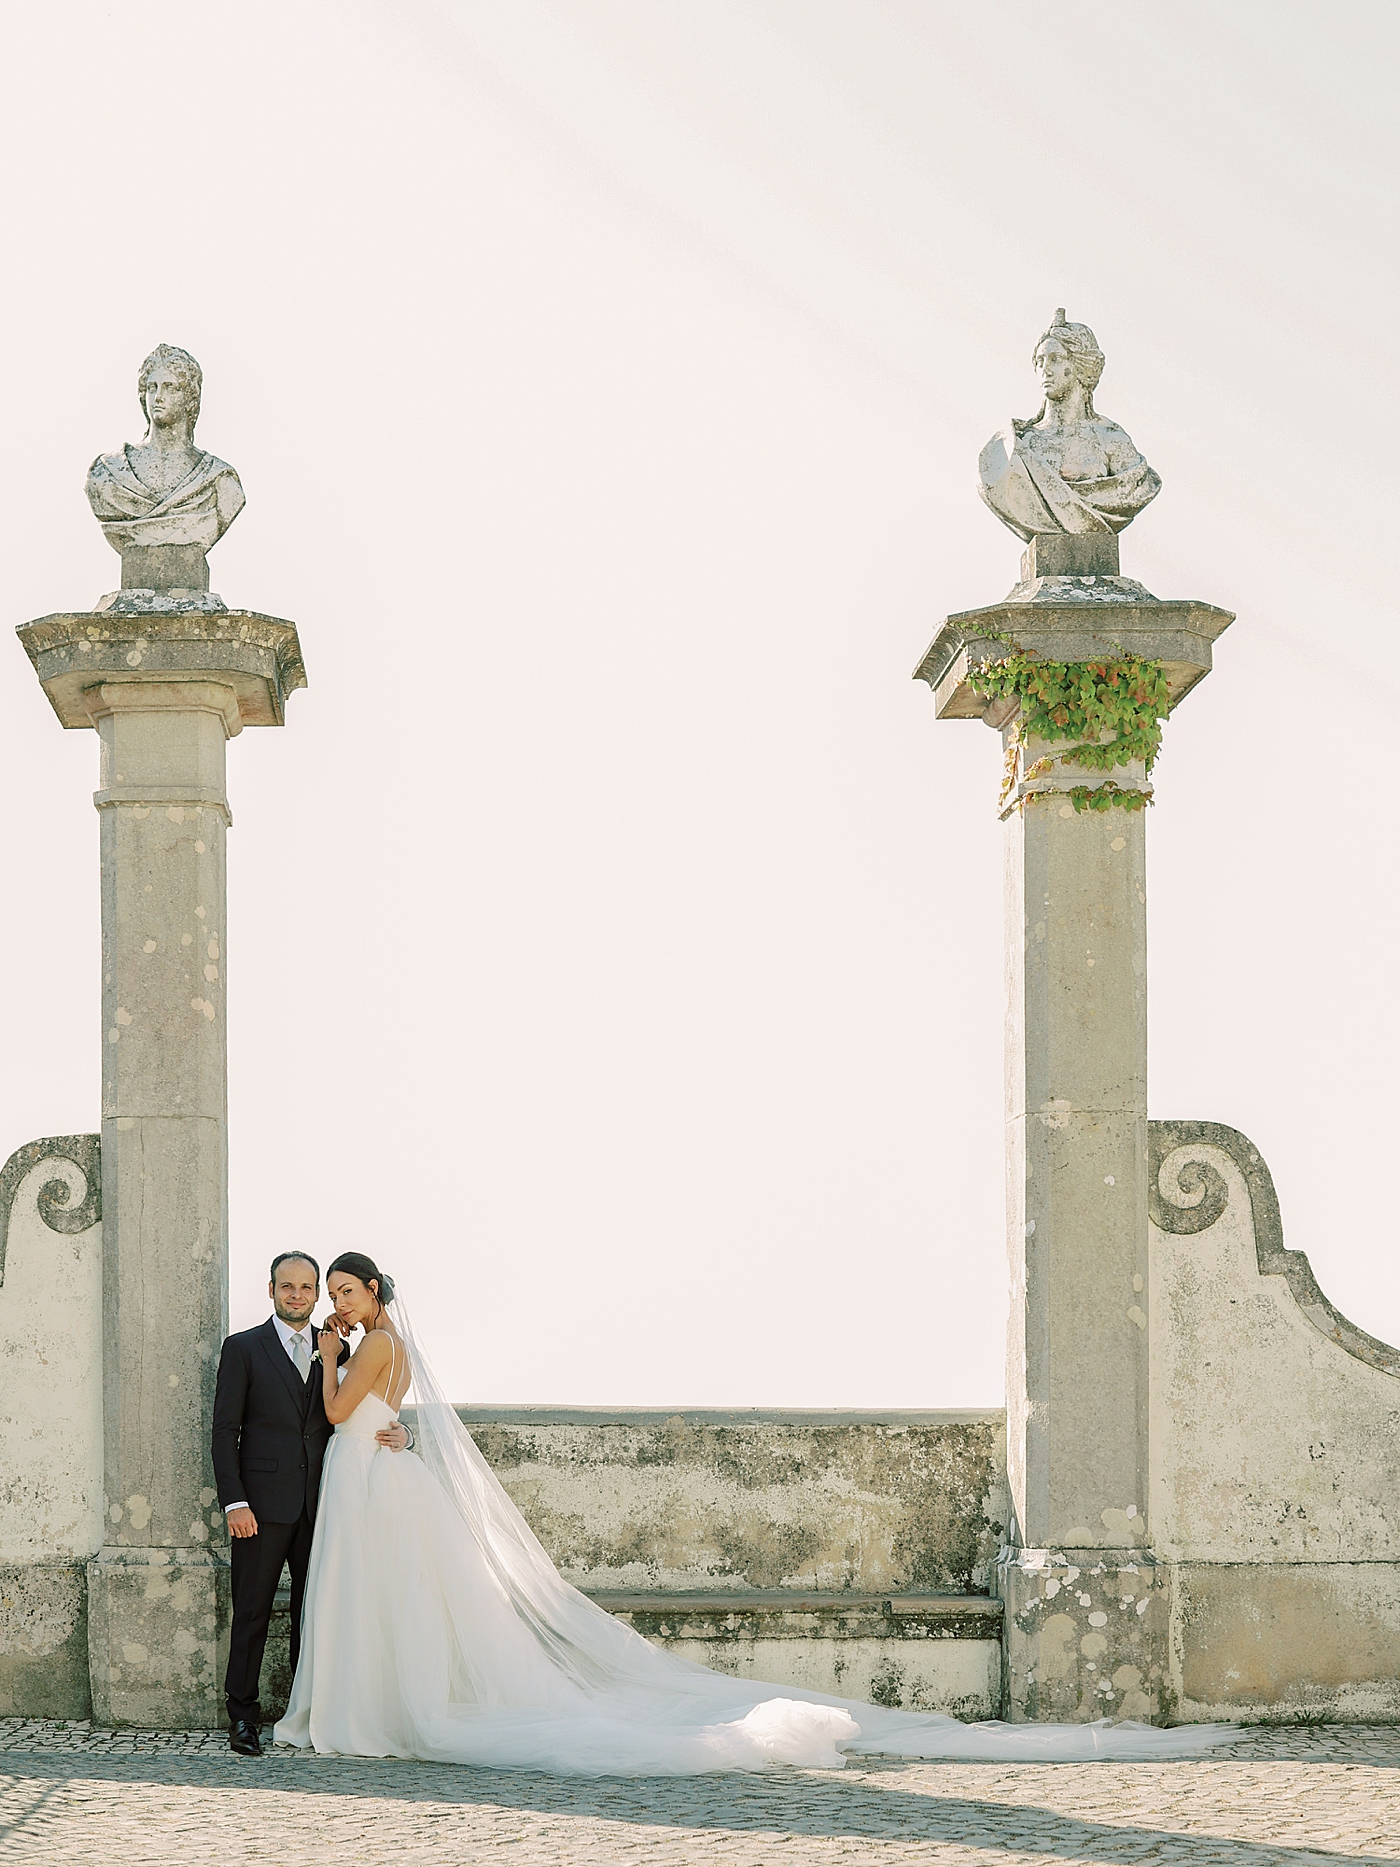 Bride and groom embracing near monument | Image by Diane Sotero Photography